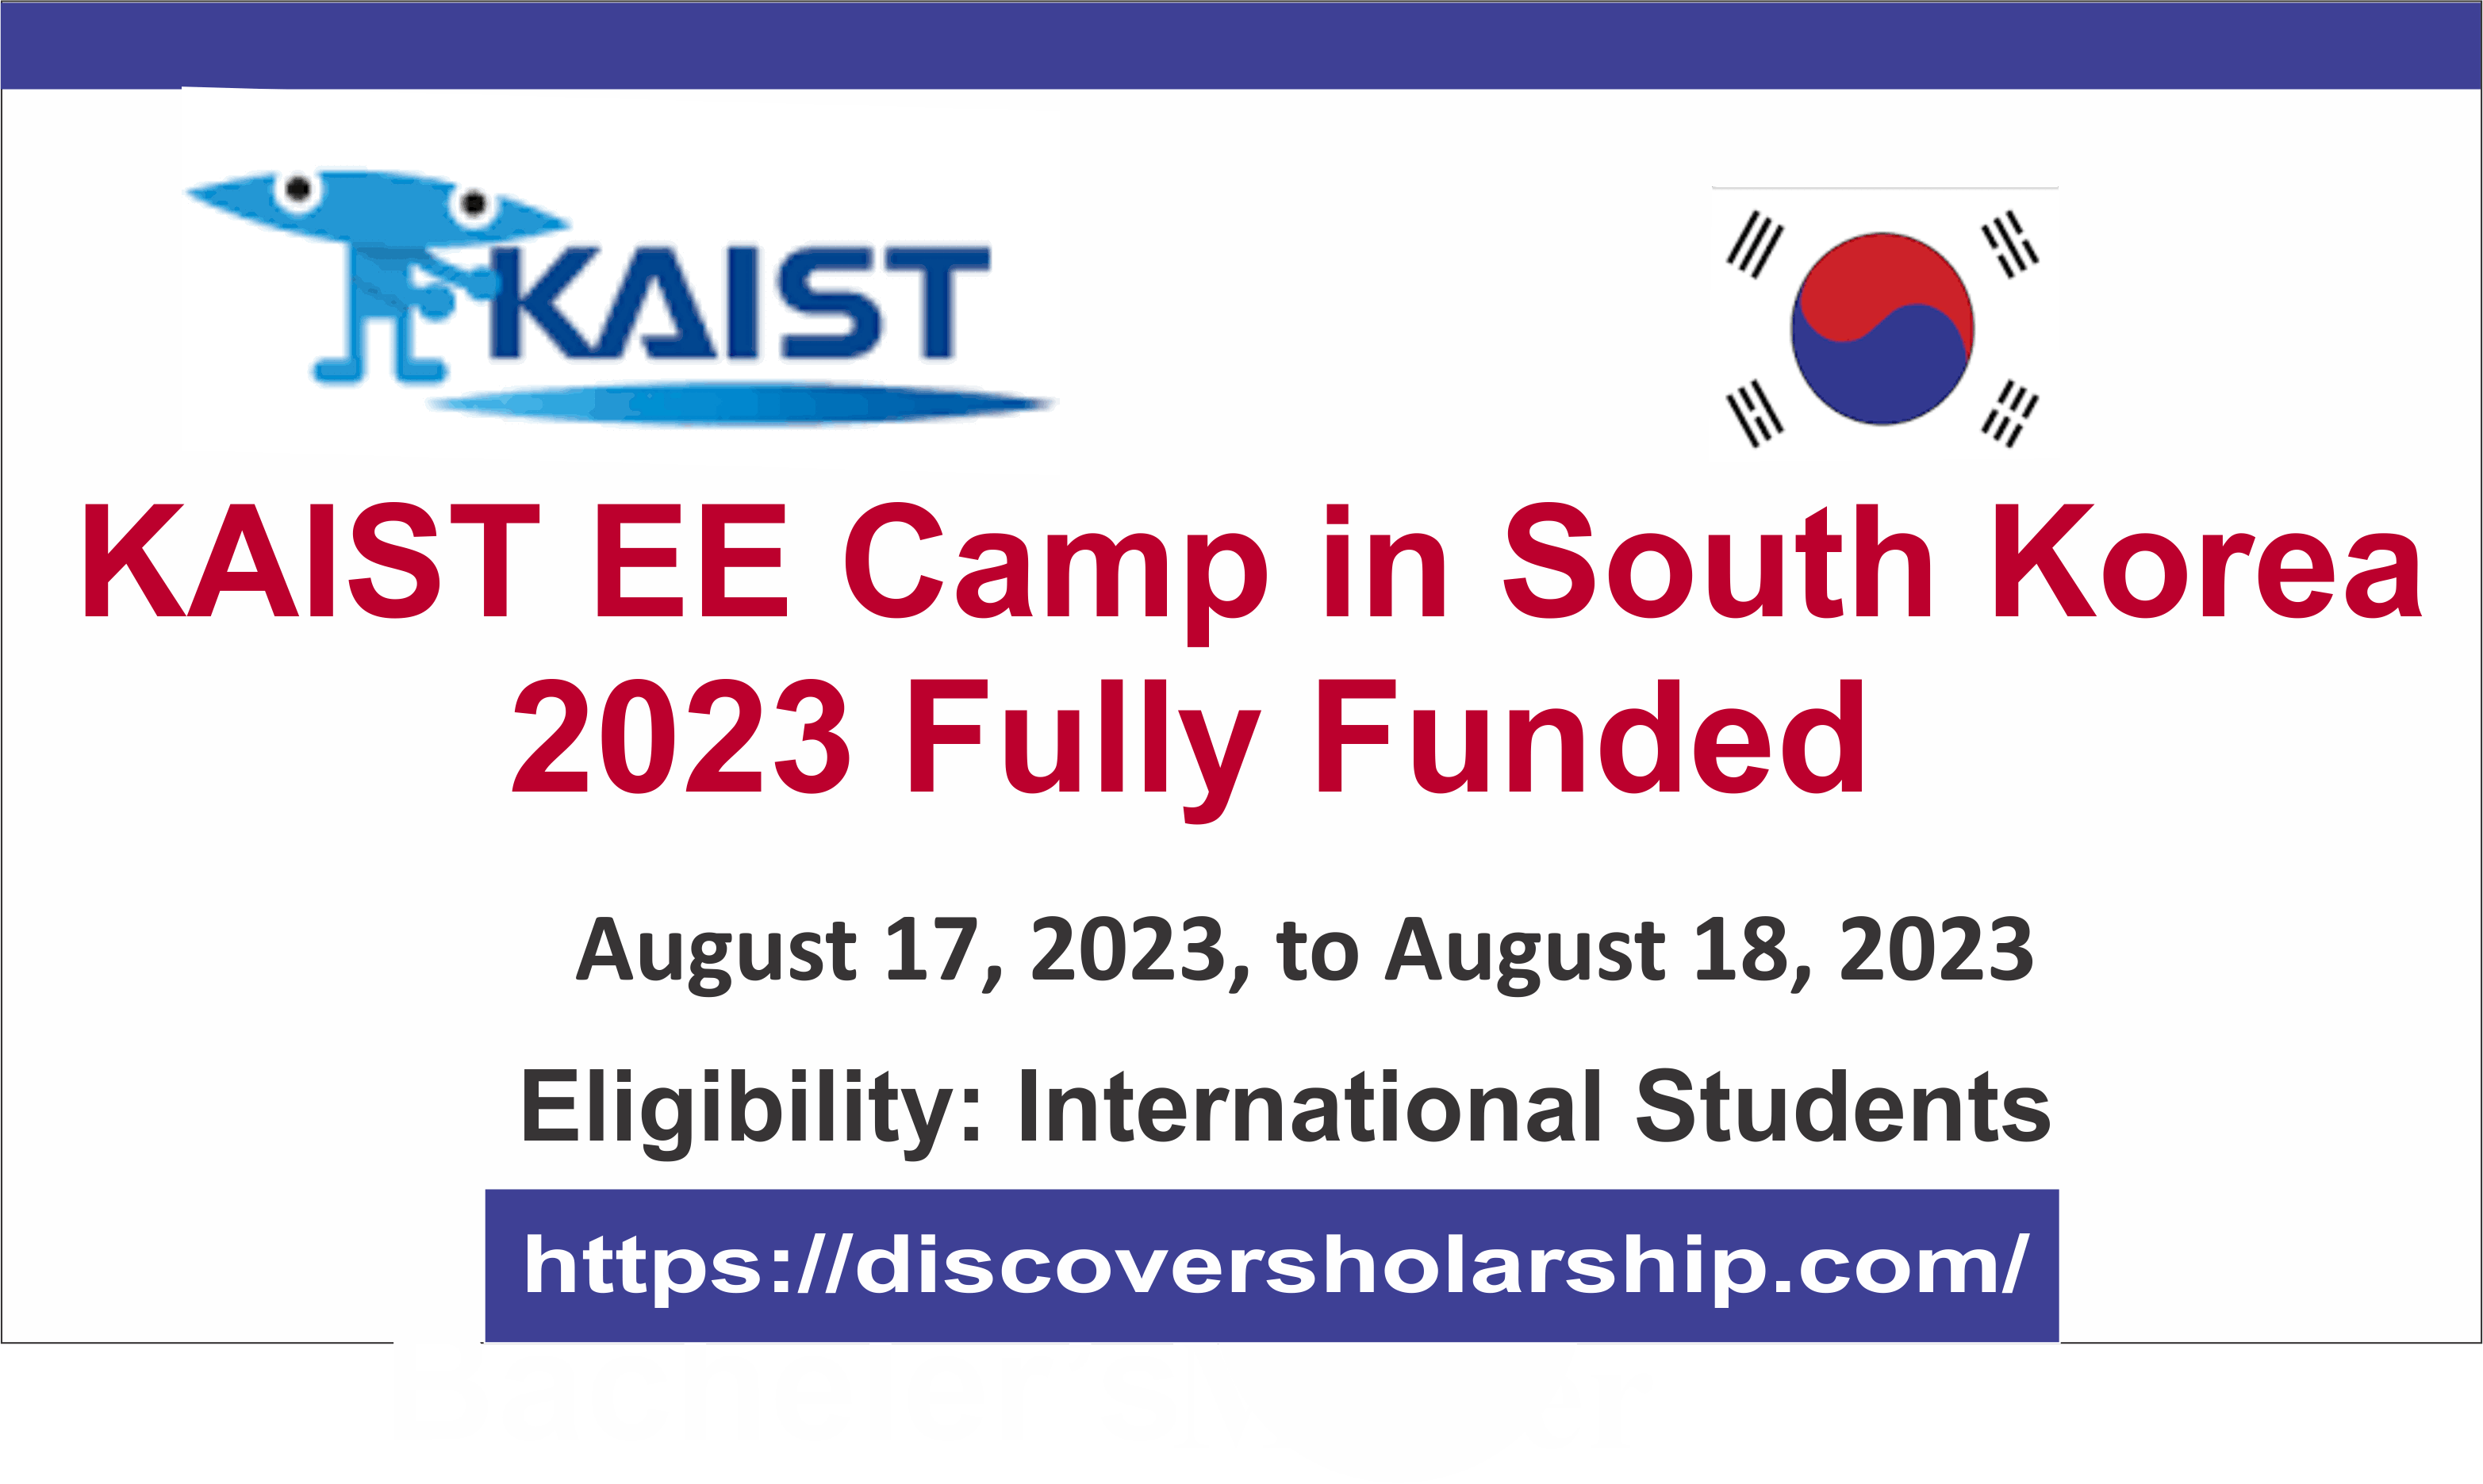 KAIST EE Camp in South Korea 2023 Fully Funded